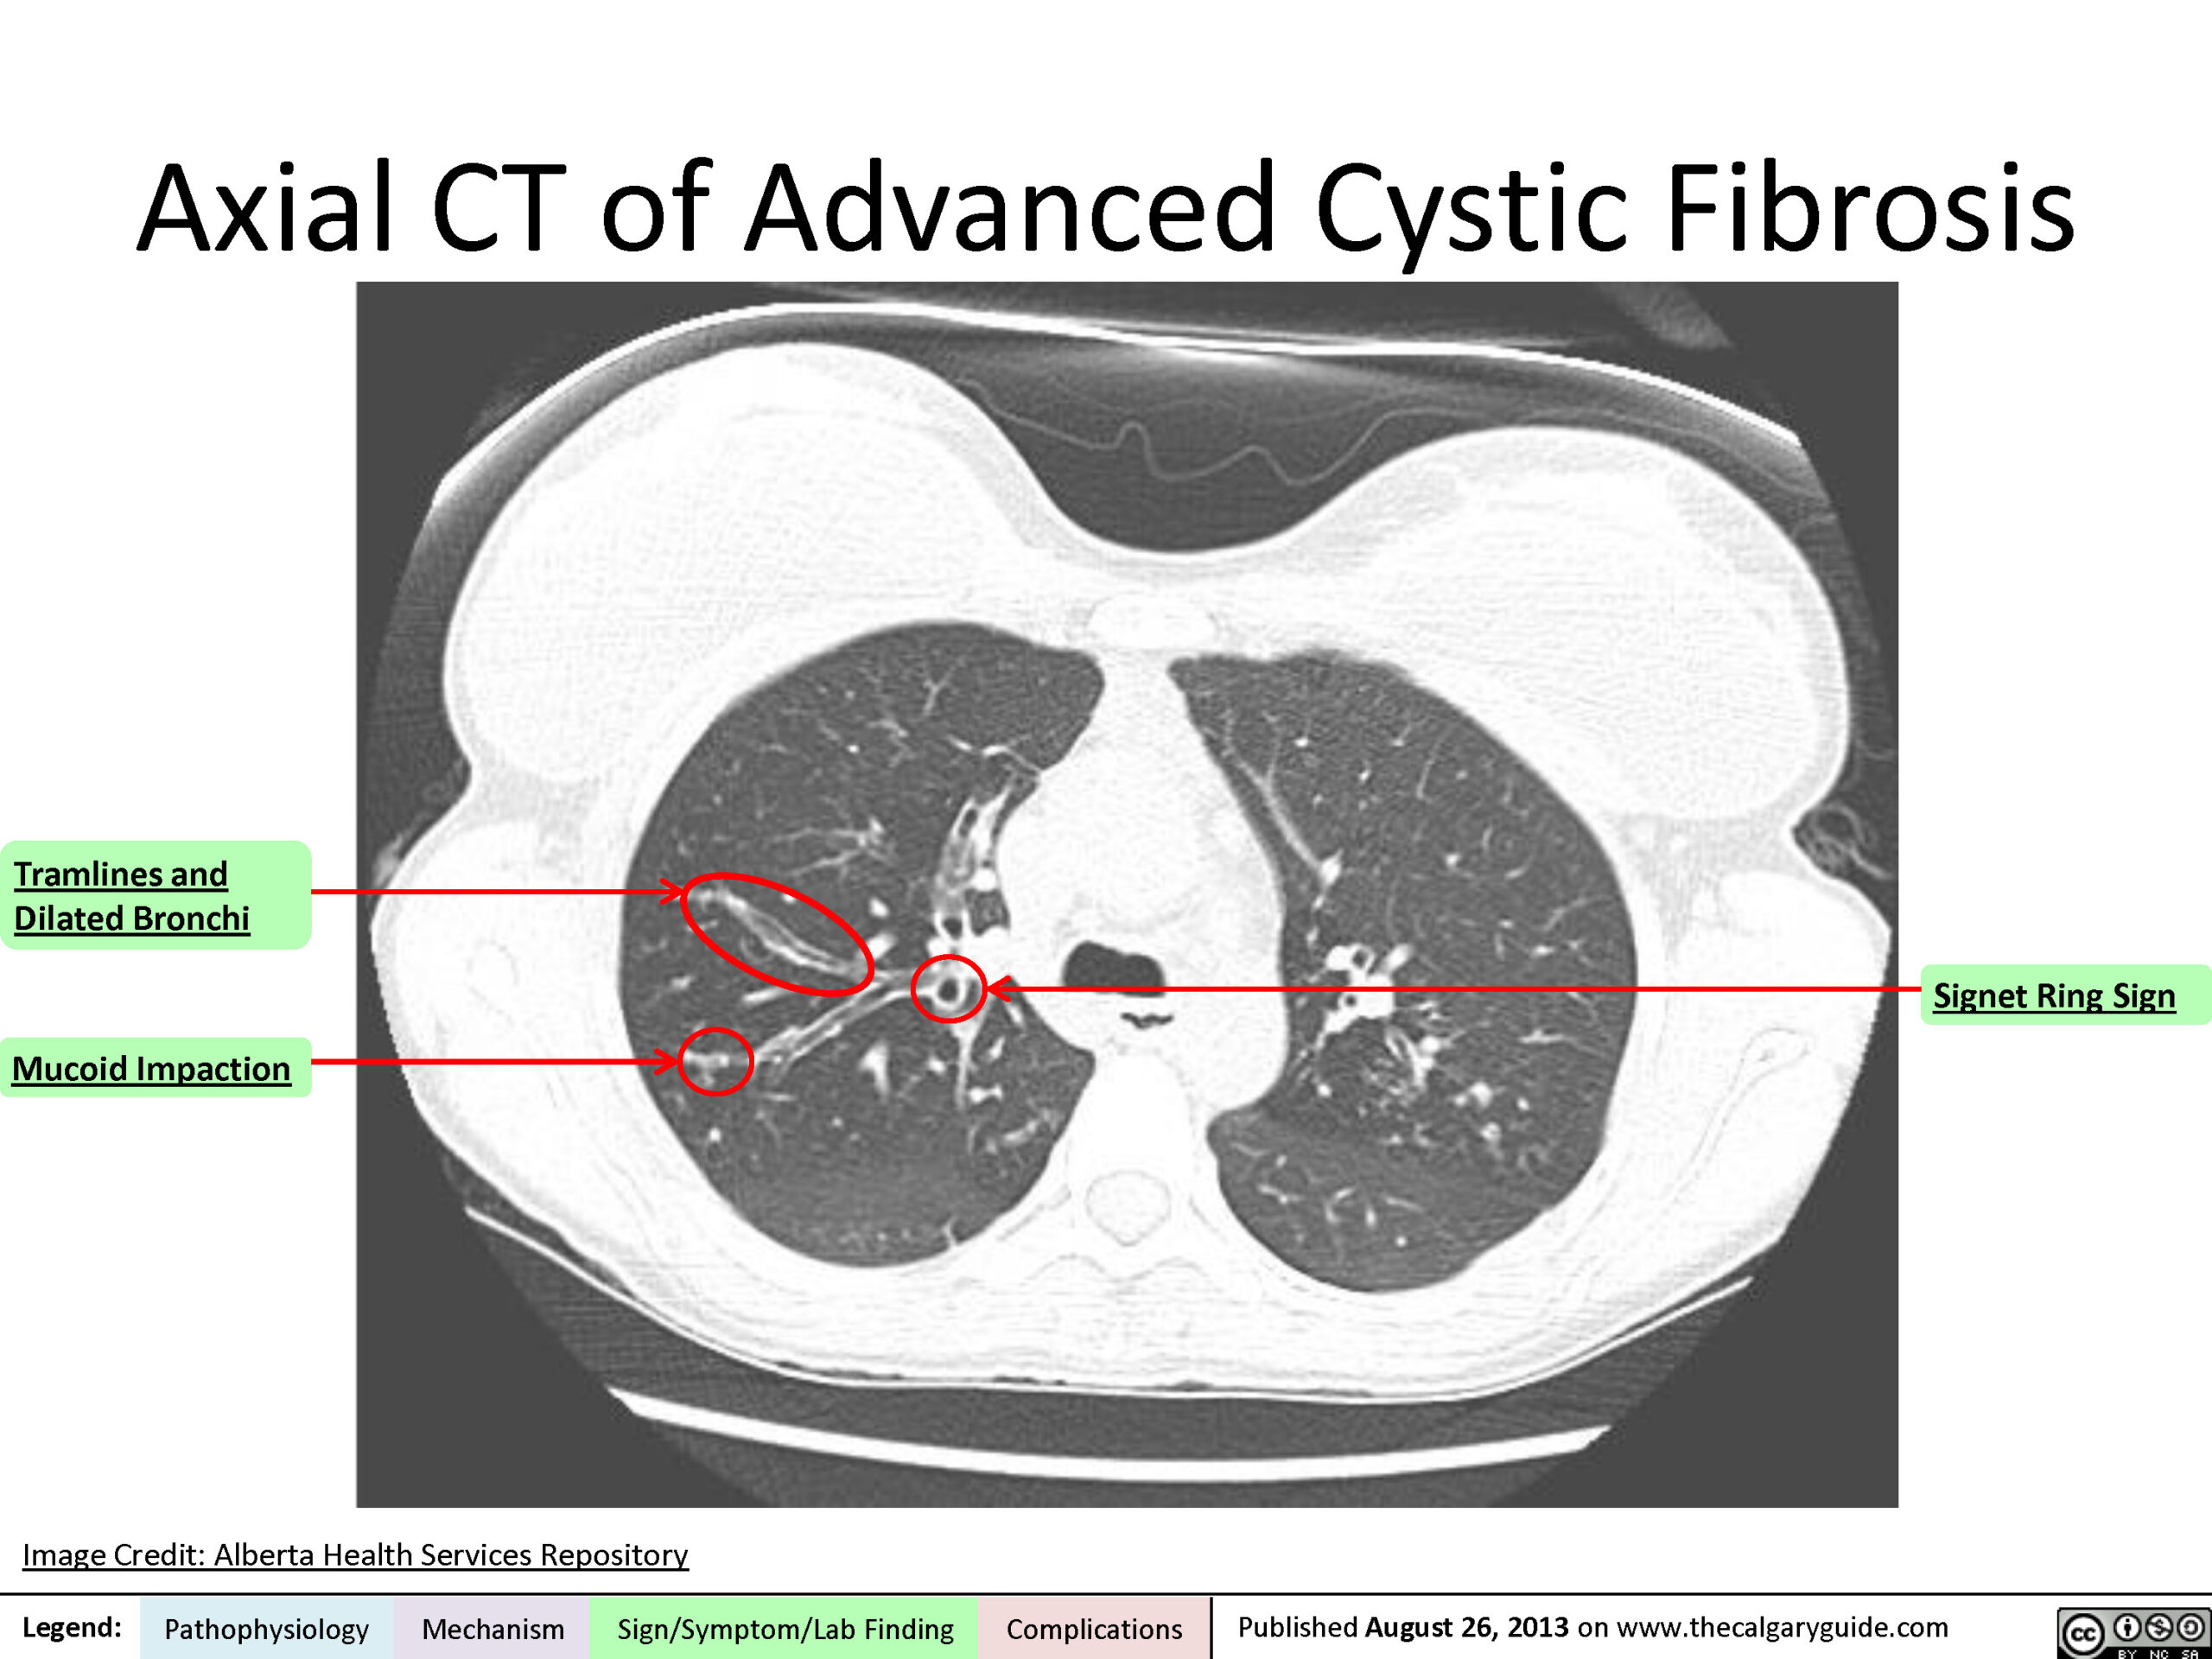 Cystic fibrosis: Axial CT